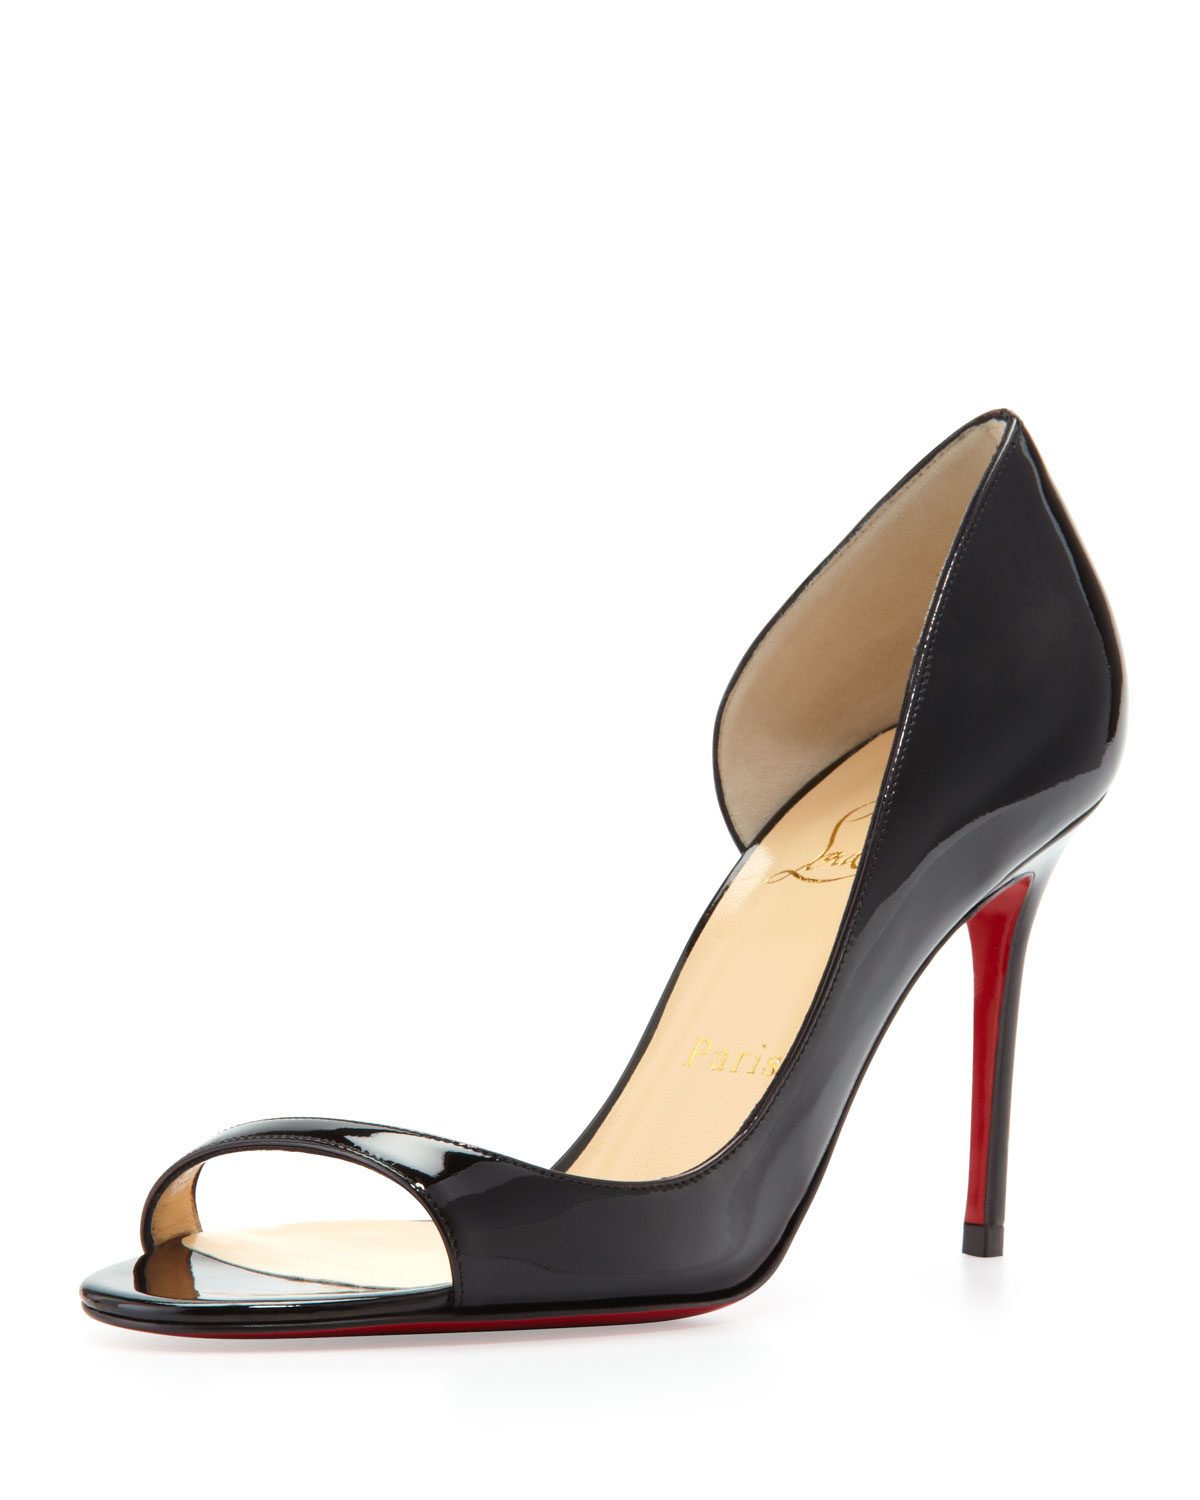 christian louboutin black spiked sneakers - christian louboutin peep-toe pumps Black and grey leather mesh ...